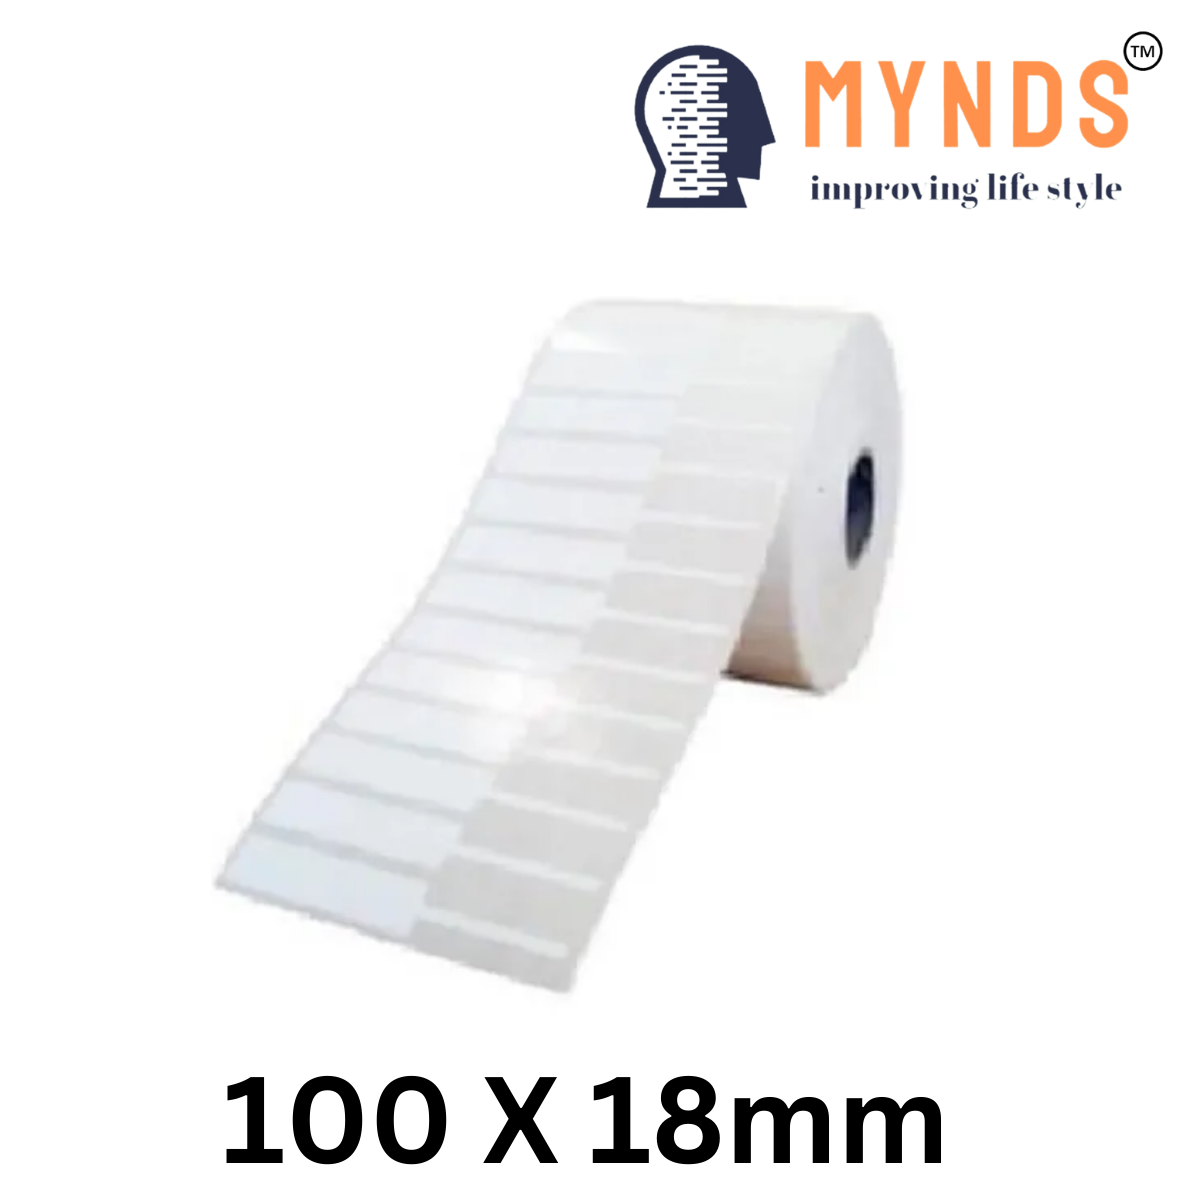 100 X 18mm Labels by MYNDS